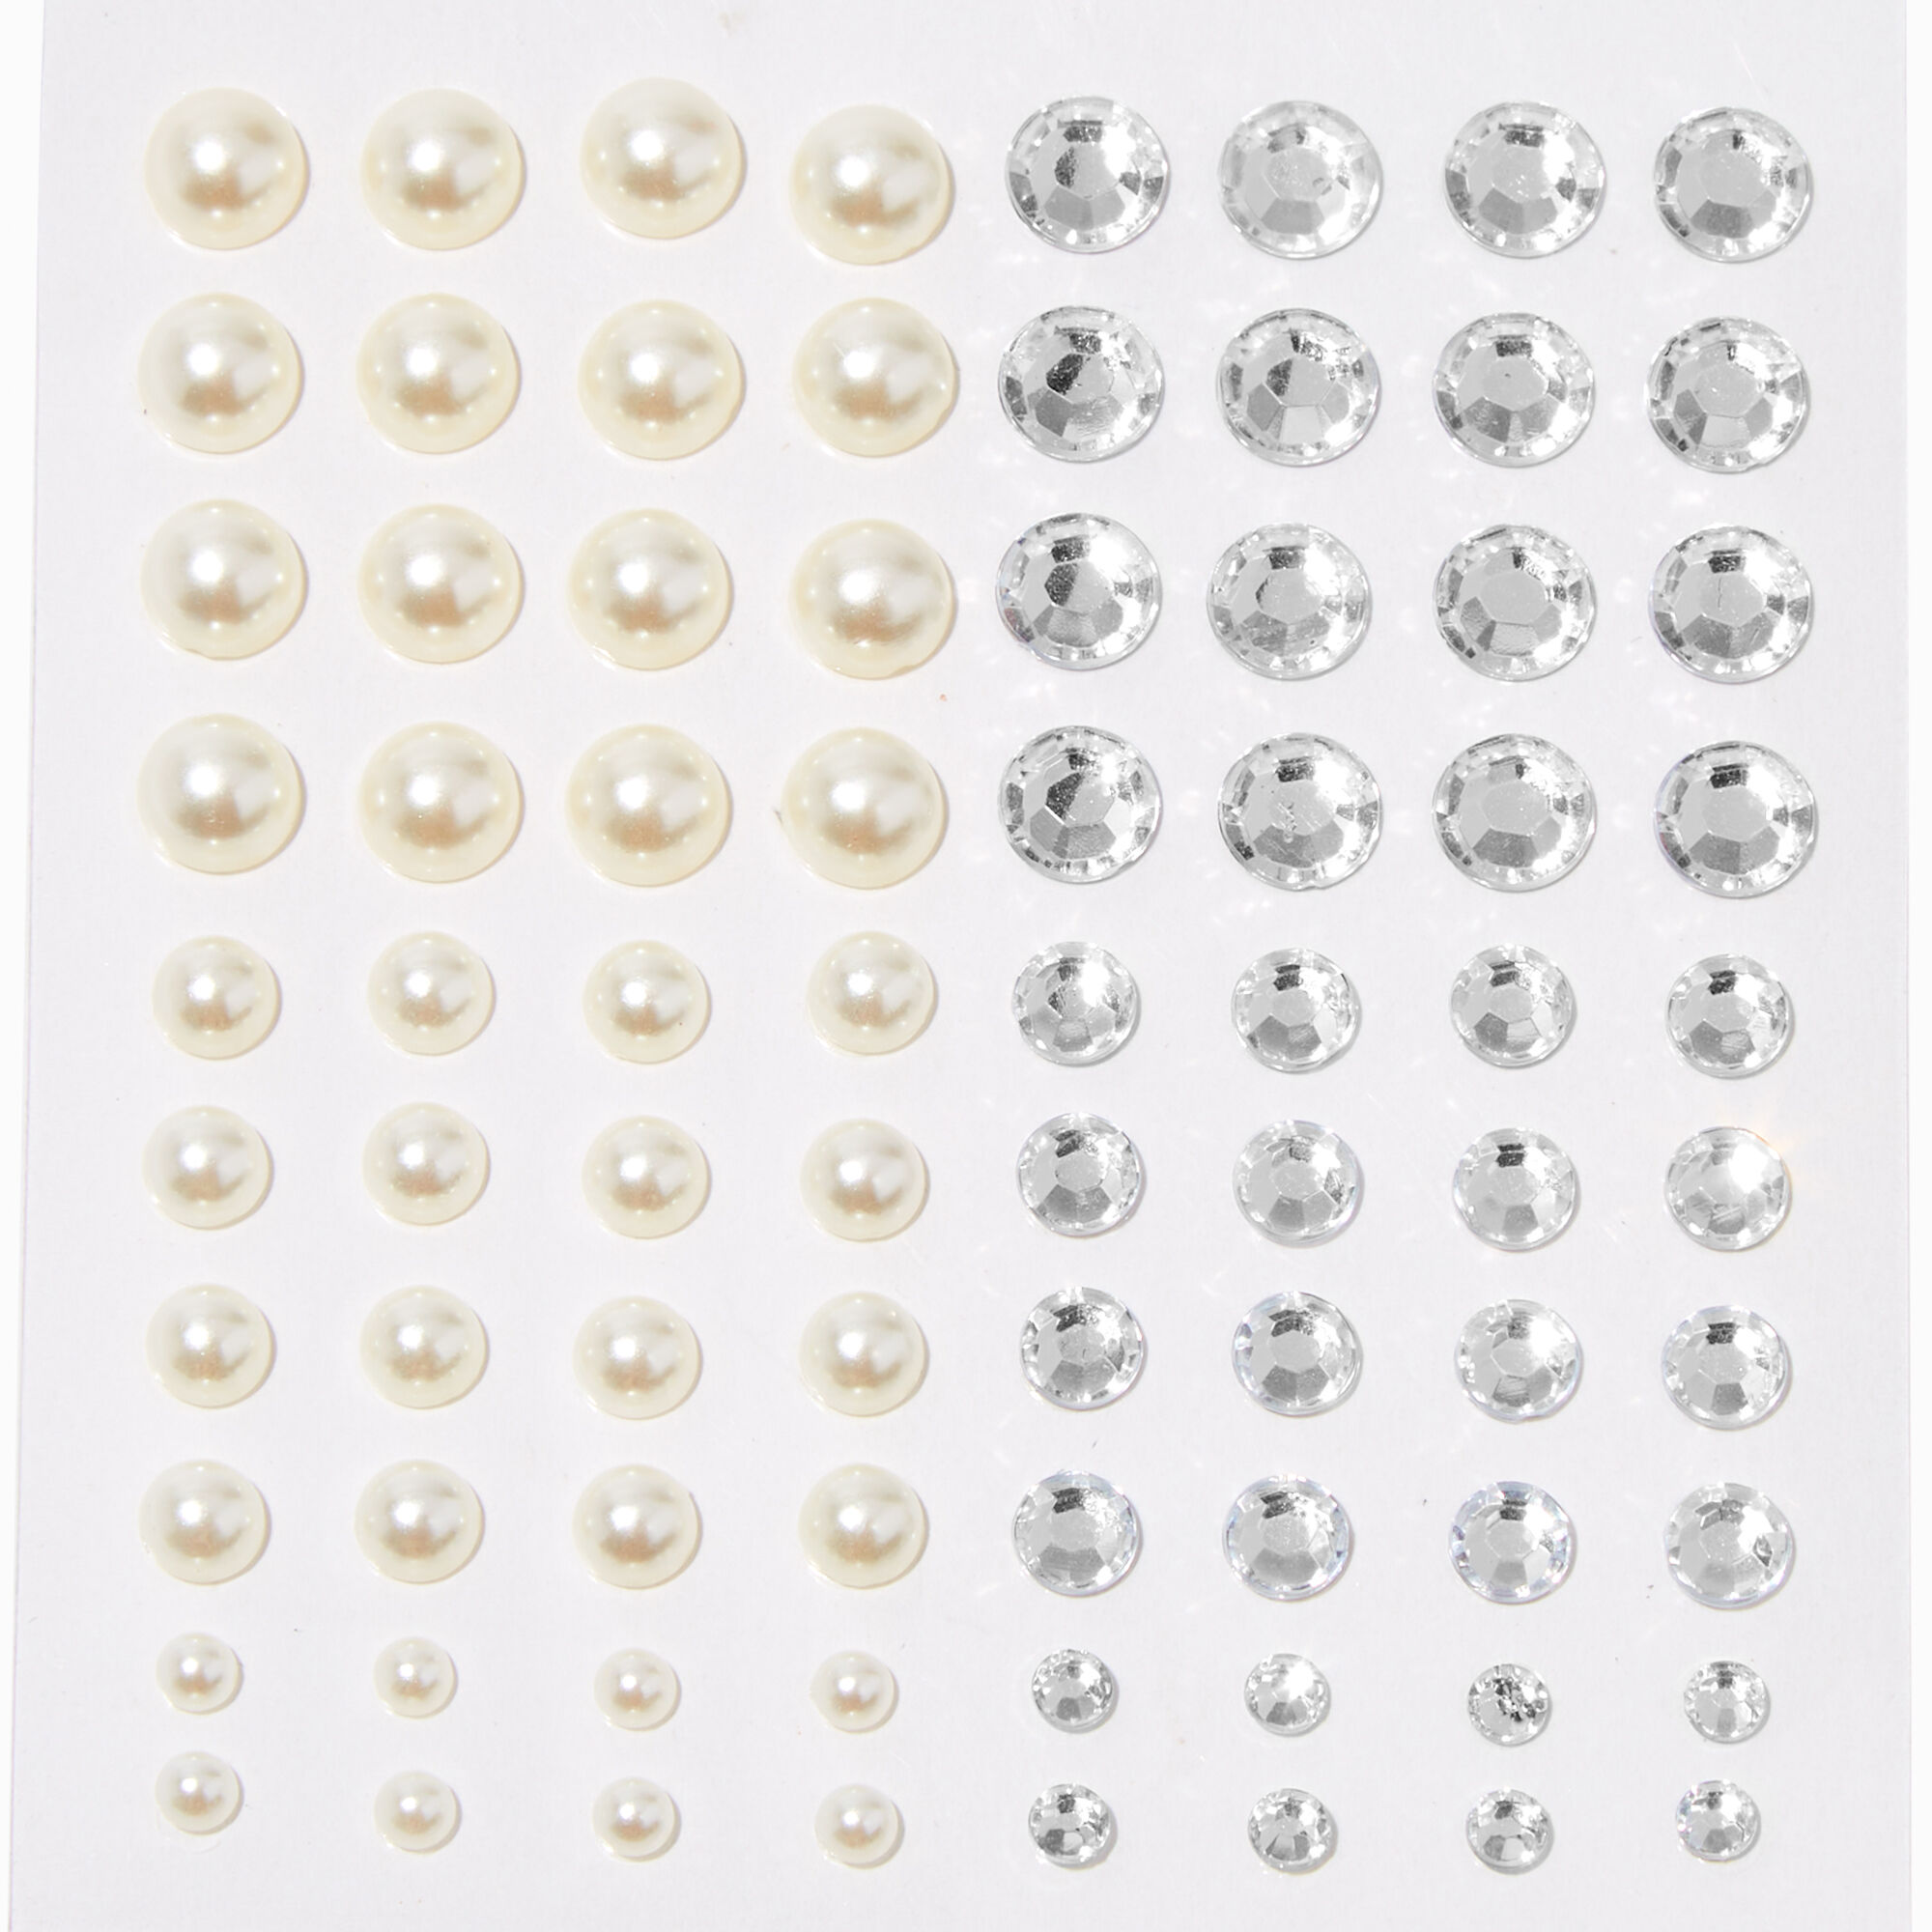 View Claires Pearl And Crystal Hair Gems 80 Pack information